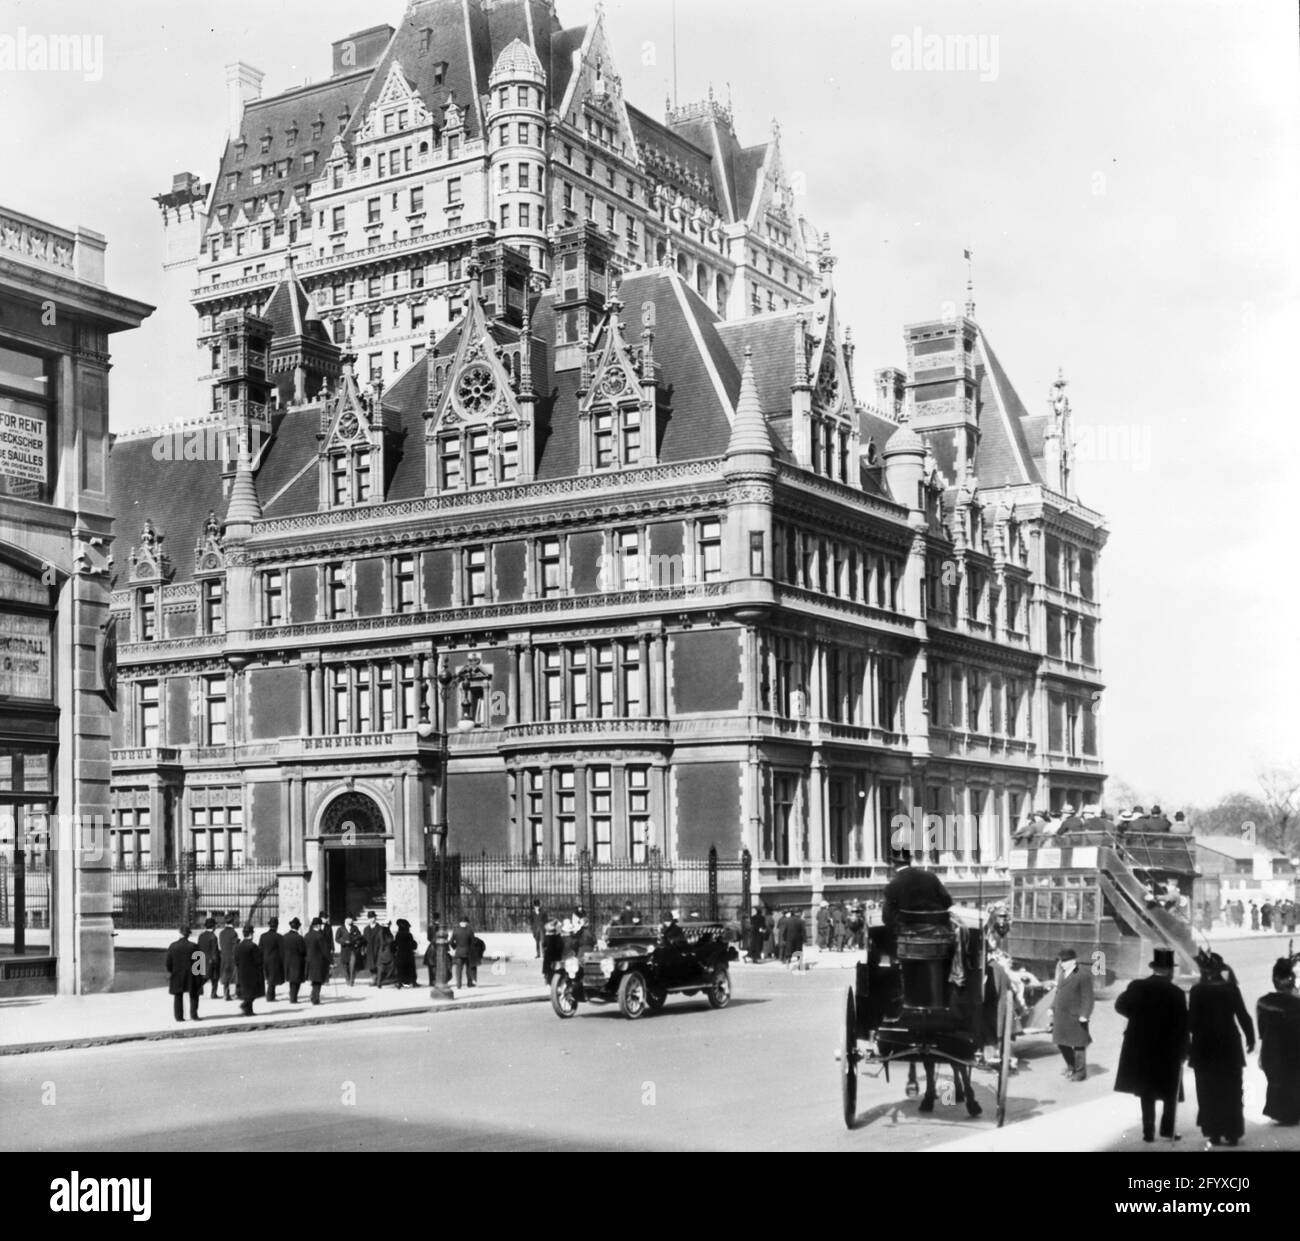 Exterior view, looking north across the intersection of 5th Avenue and 57th Street, of the Cornelius Vanderbilt II House, New York, New York, May 1910. The home, built in 1883 was the largest private home in Manhattan. Visible above it is the Plaza Hotel. (Photo by Burton Holmes) Stock Photo